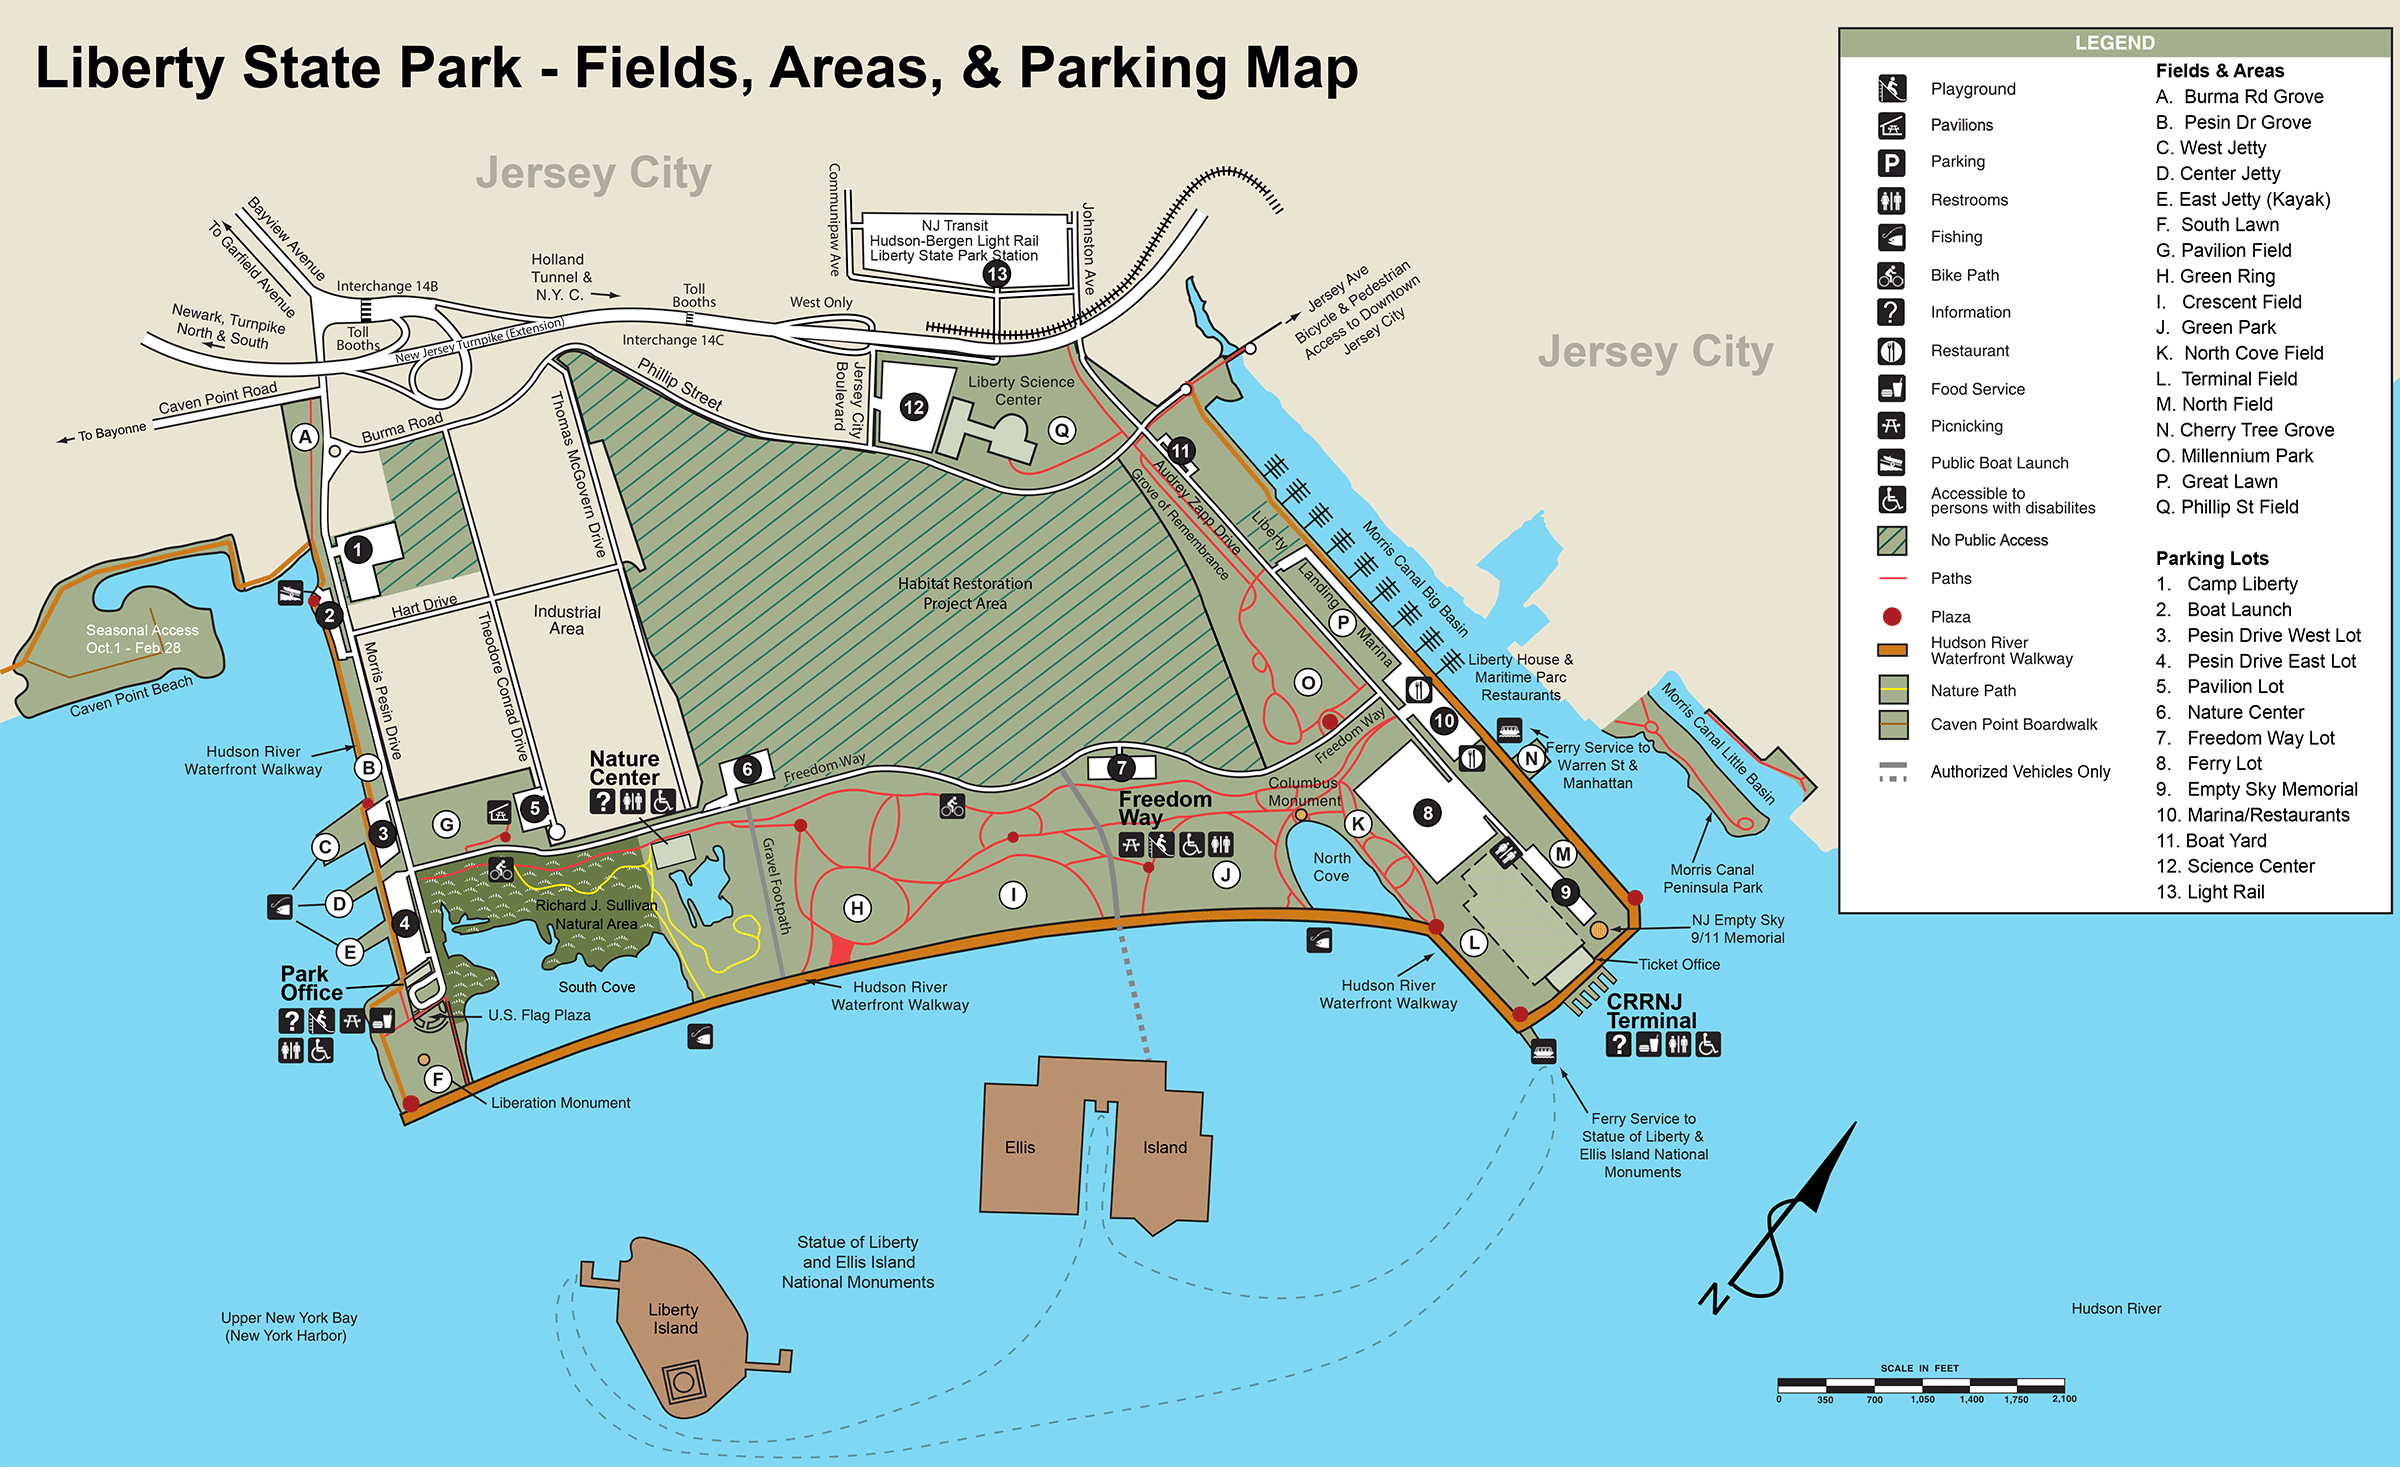 New York Liberty State Park Transport, Fields, Areas and Parking Map